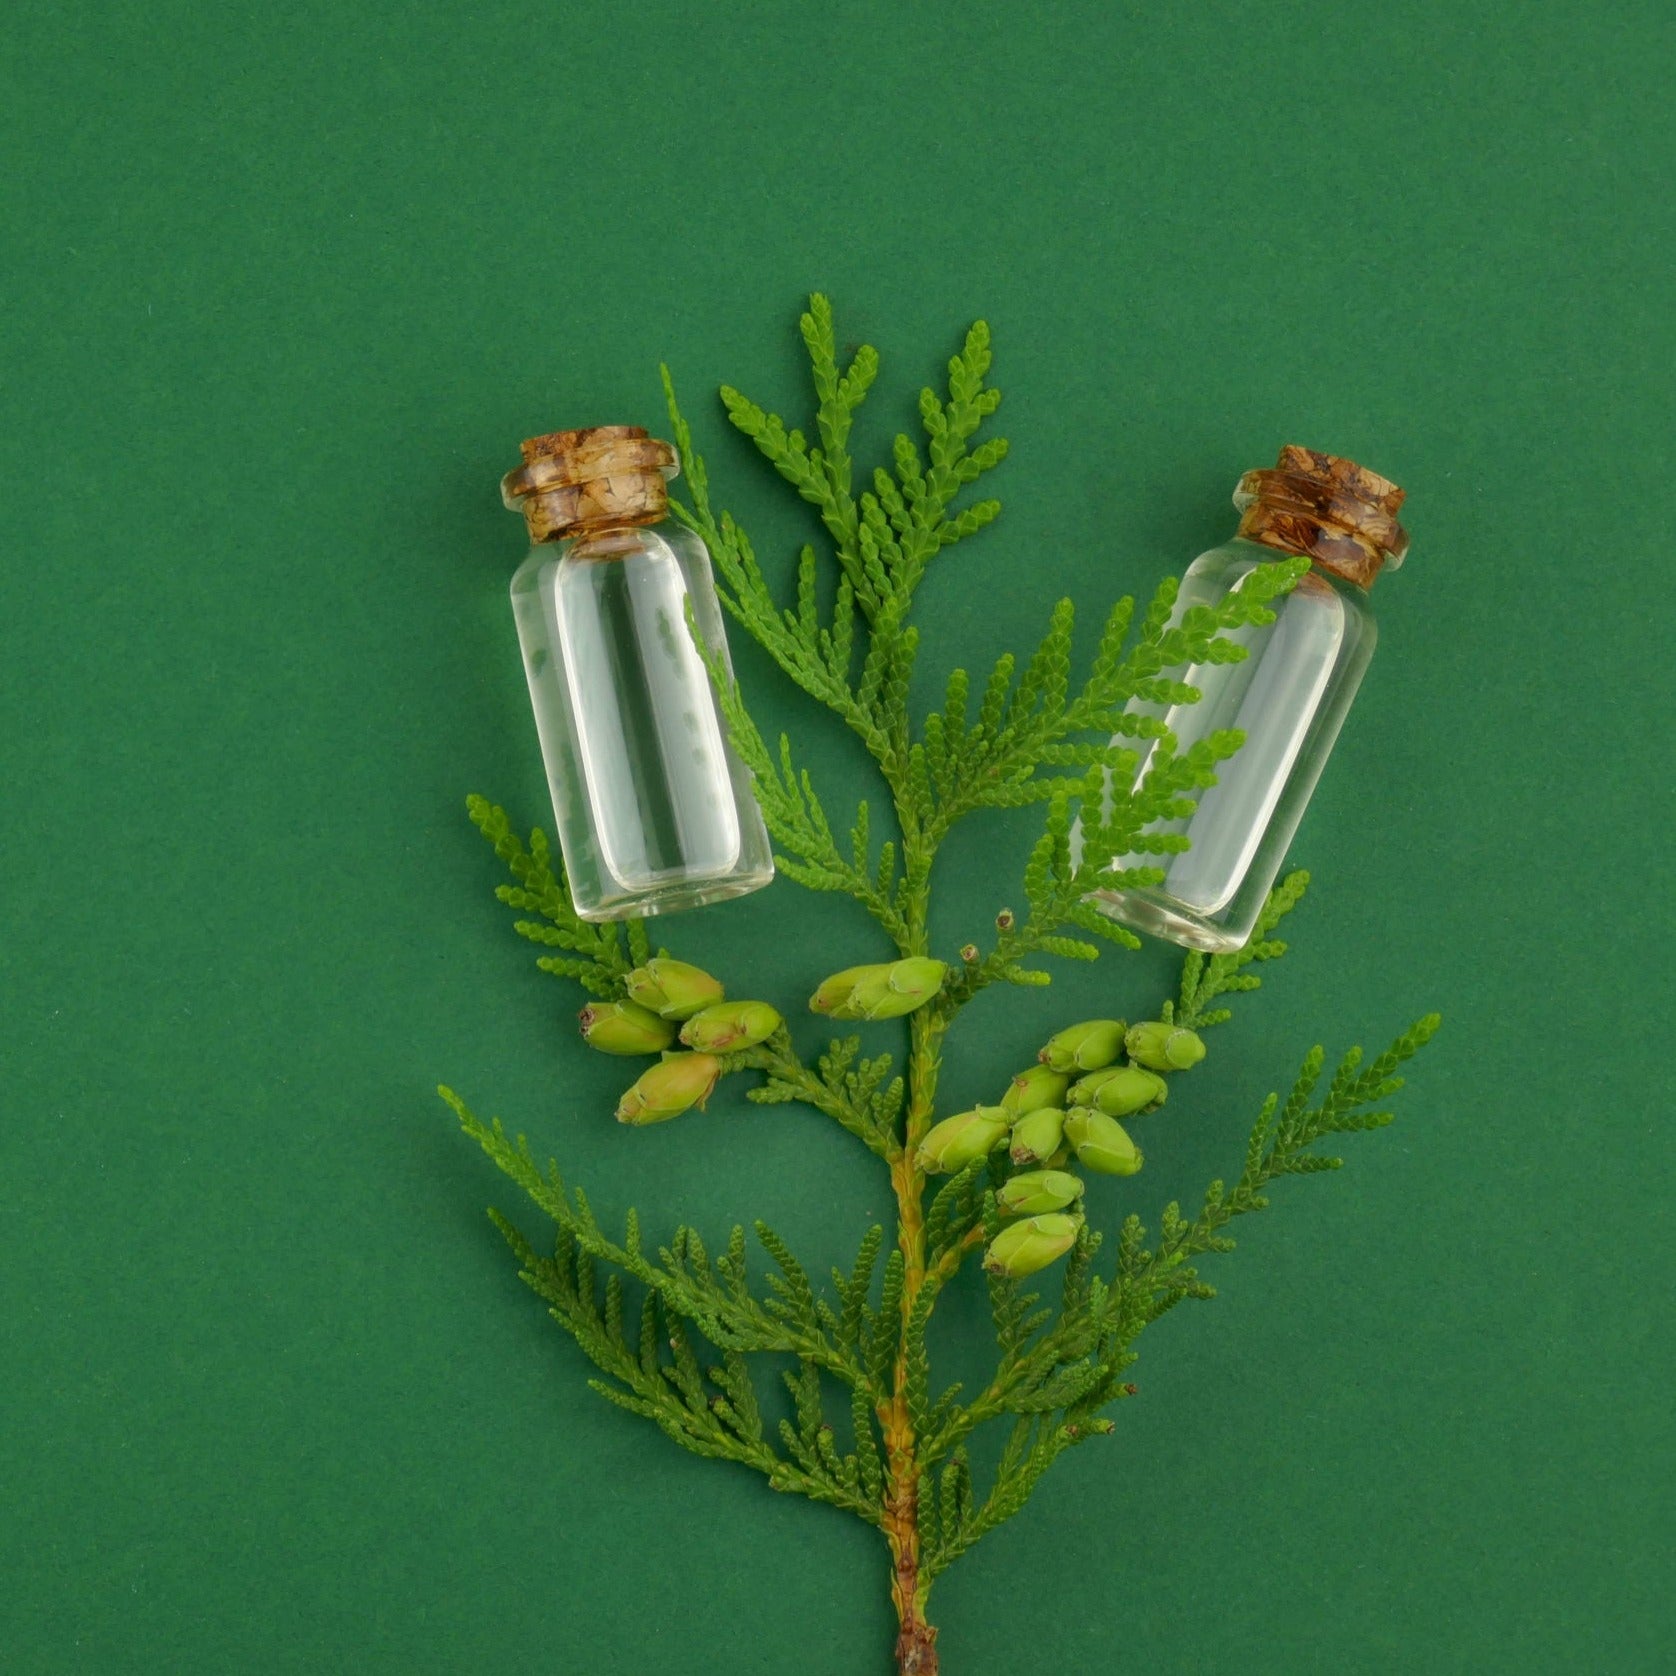 All Things Being Eco - Cedar Leaf (Thuja) Bulk Essential Oil - all things being eco chilliwack